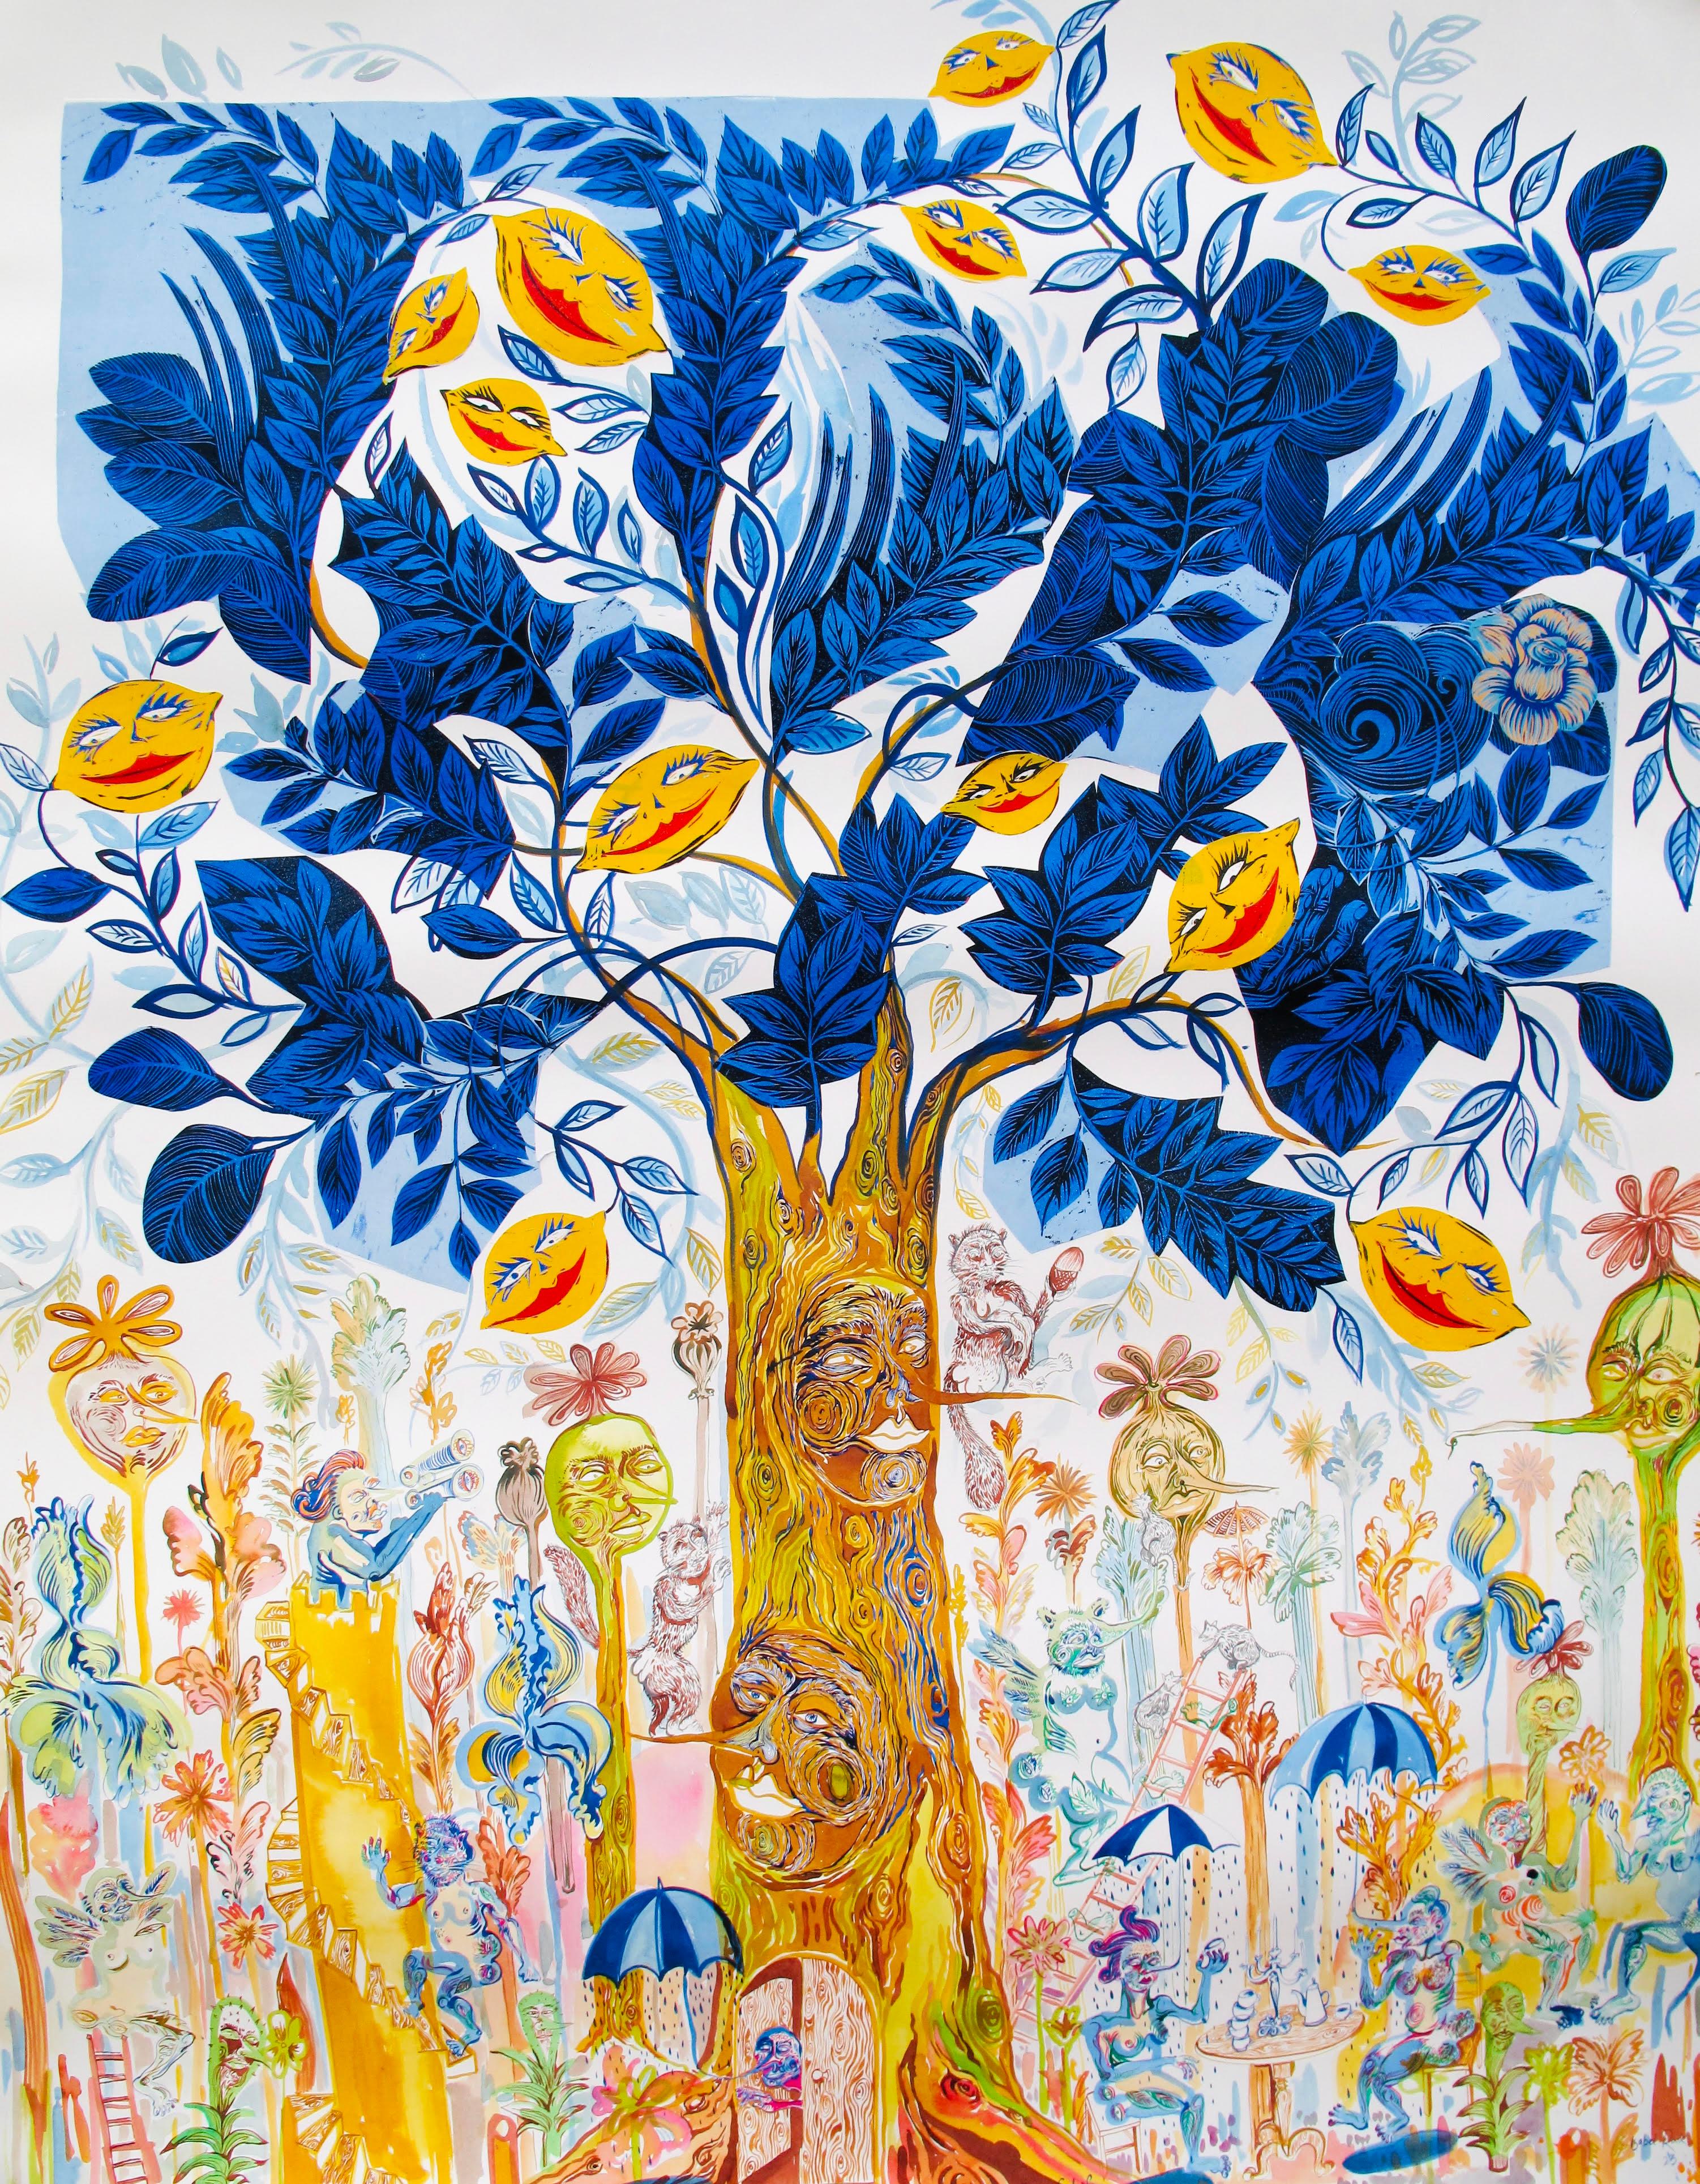 Isabel Rock Figurative Painting - Surrealist Large Painting Royal College of Art LGBTQ+ Female Tree of Life Blue